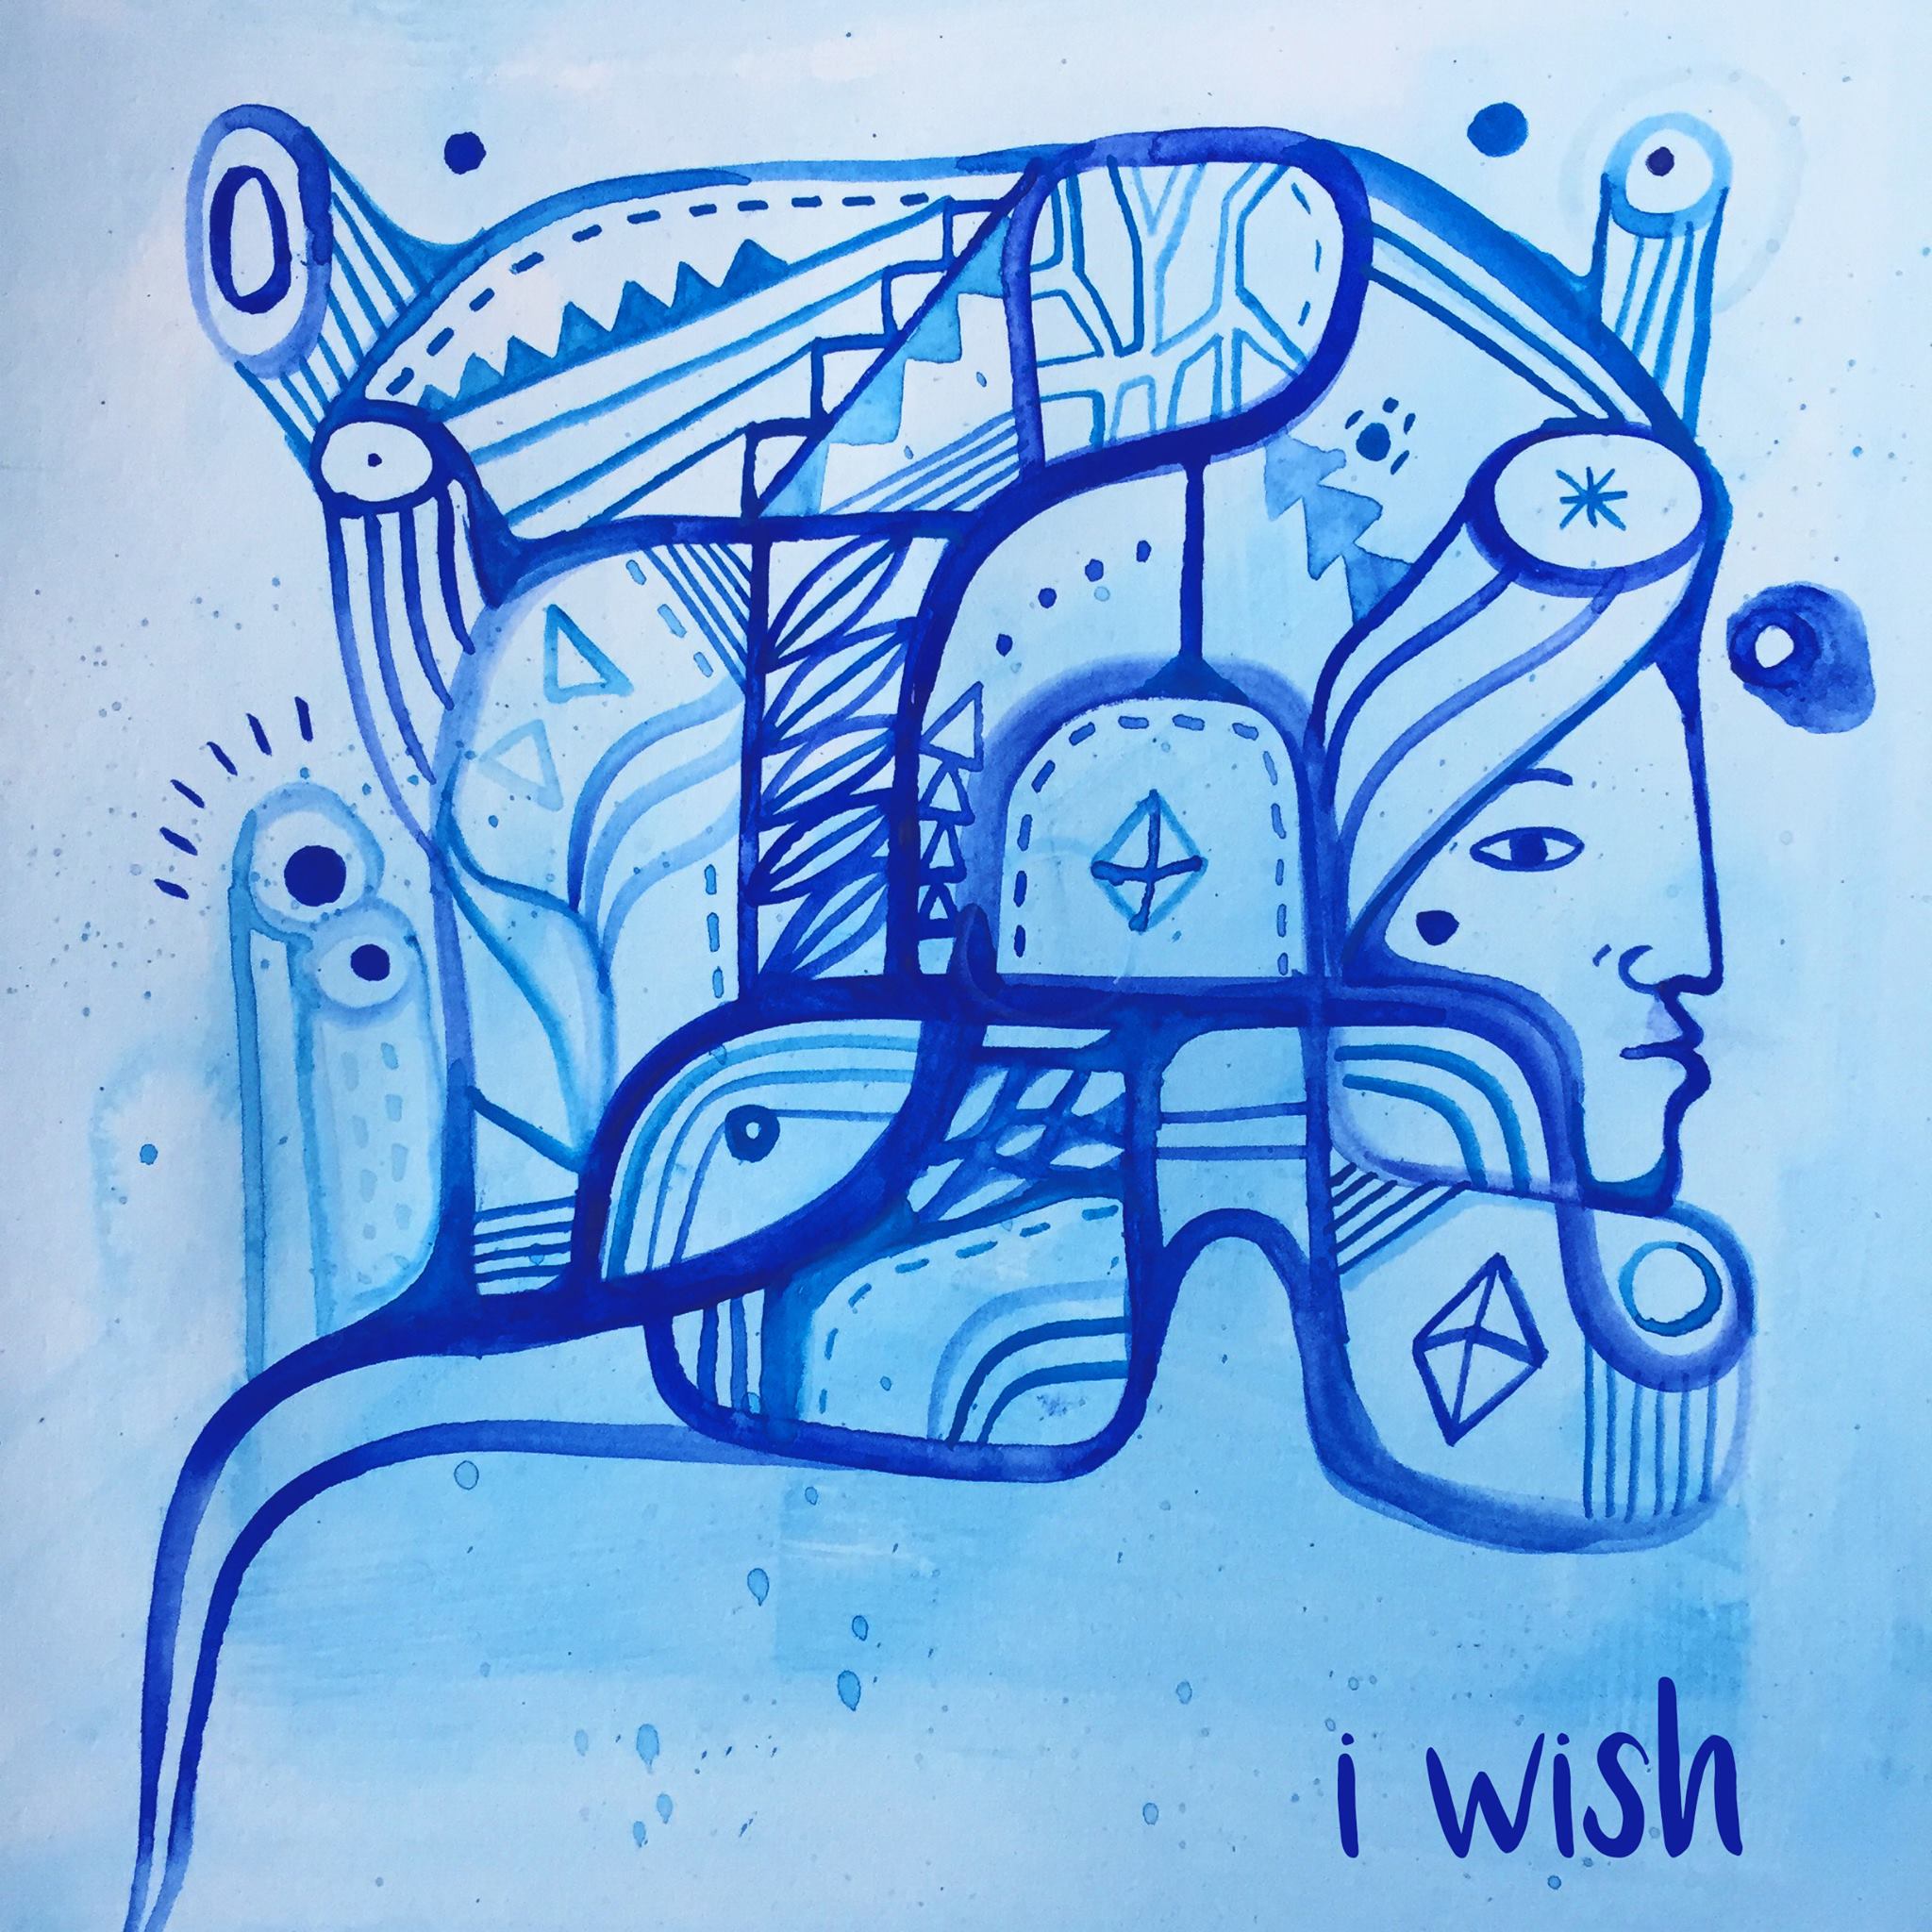 JSWISS & Temple5 Connect For “I Wish”